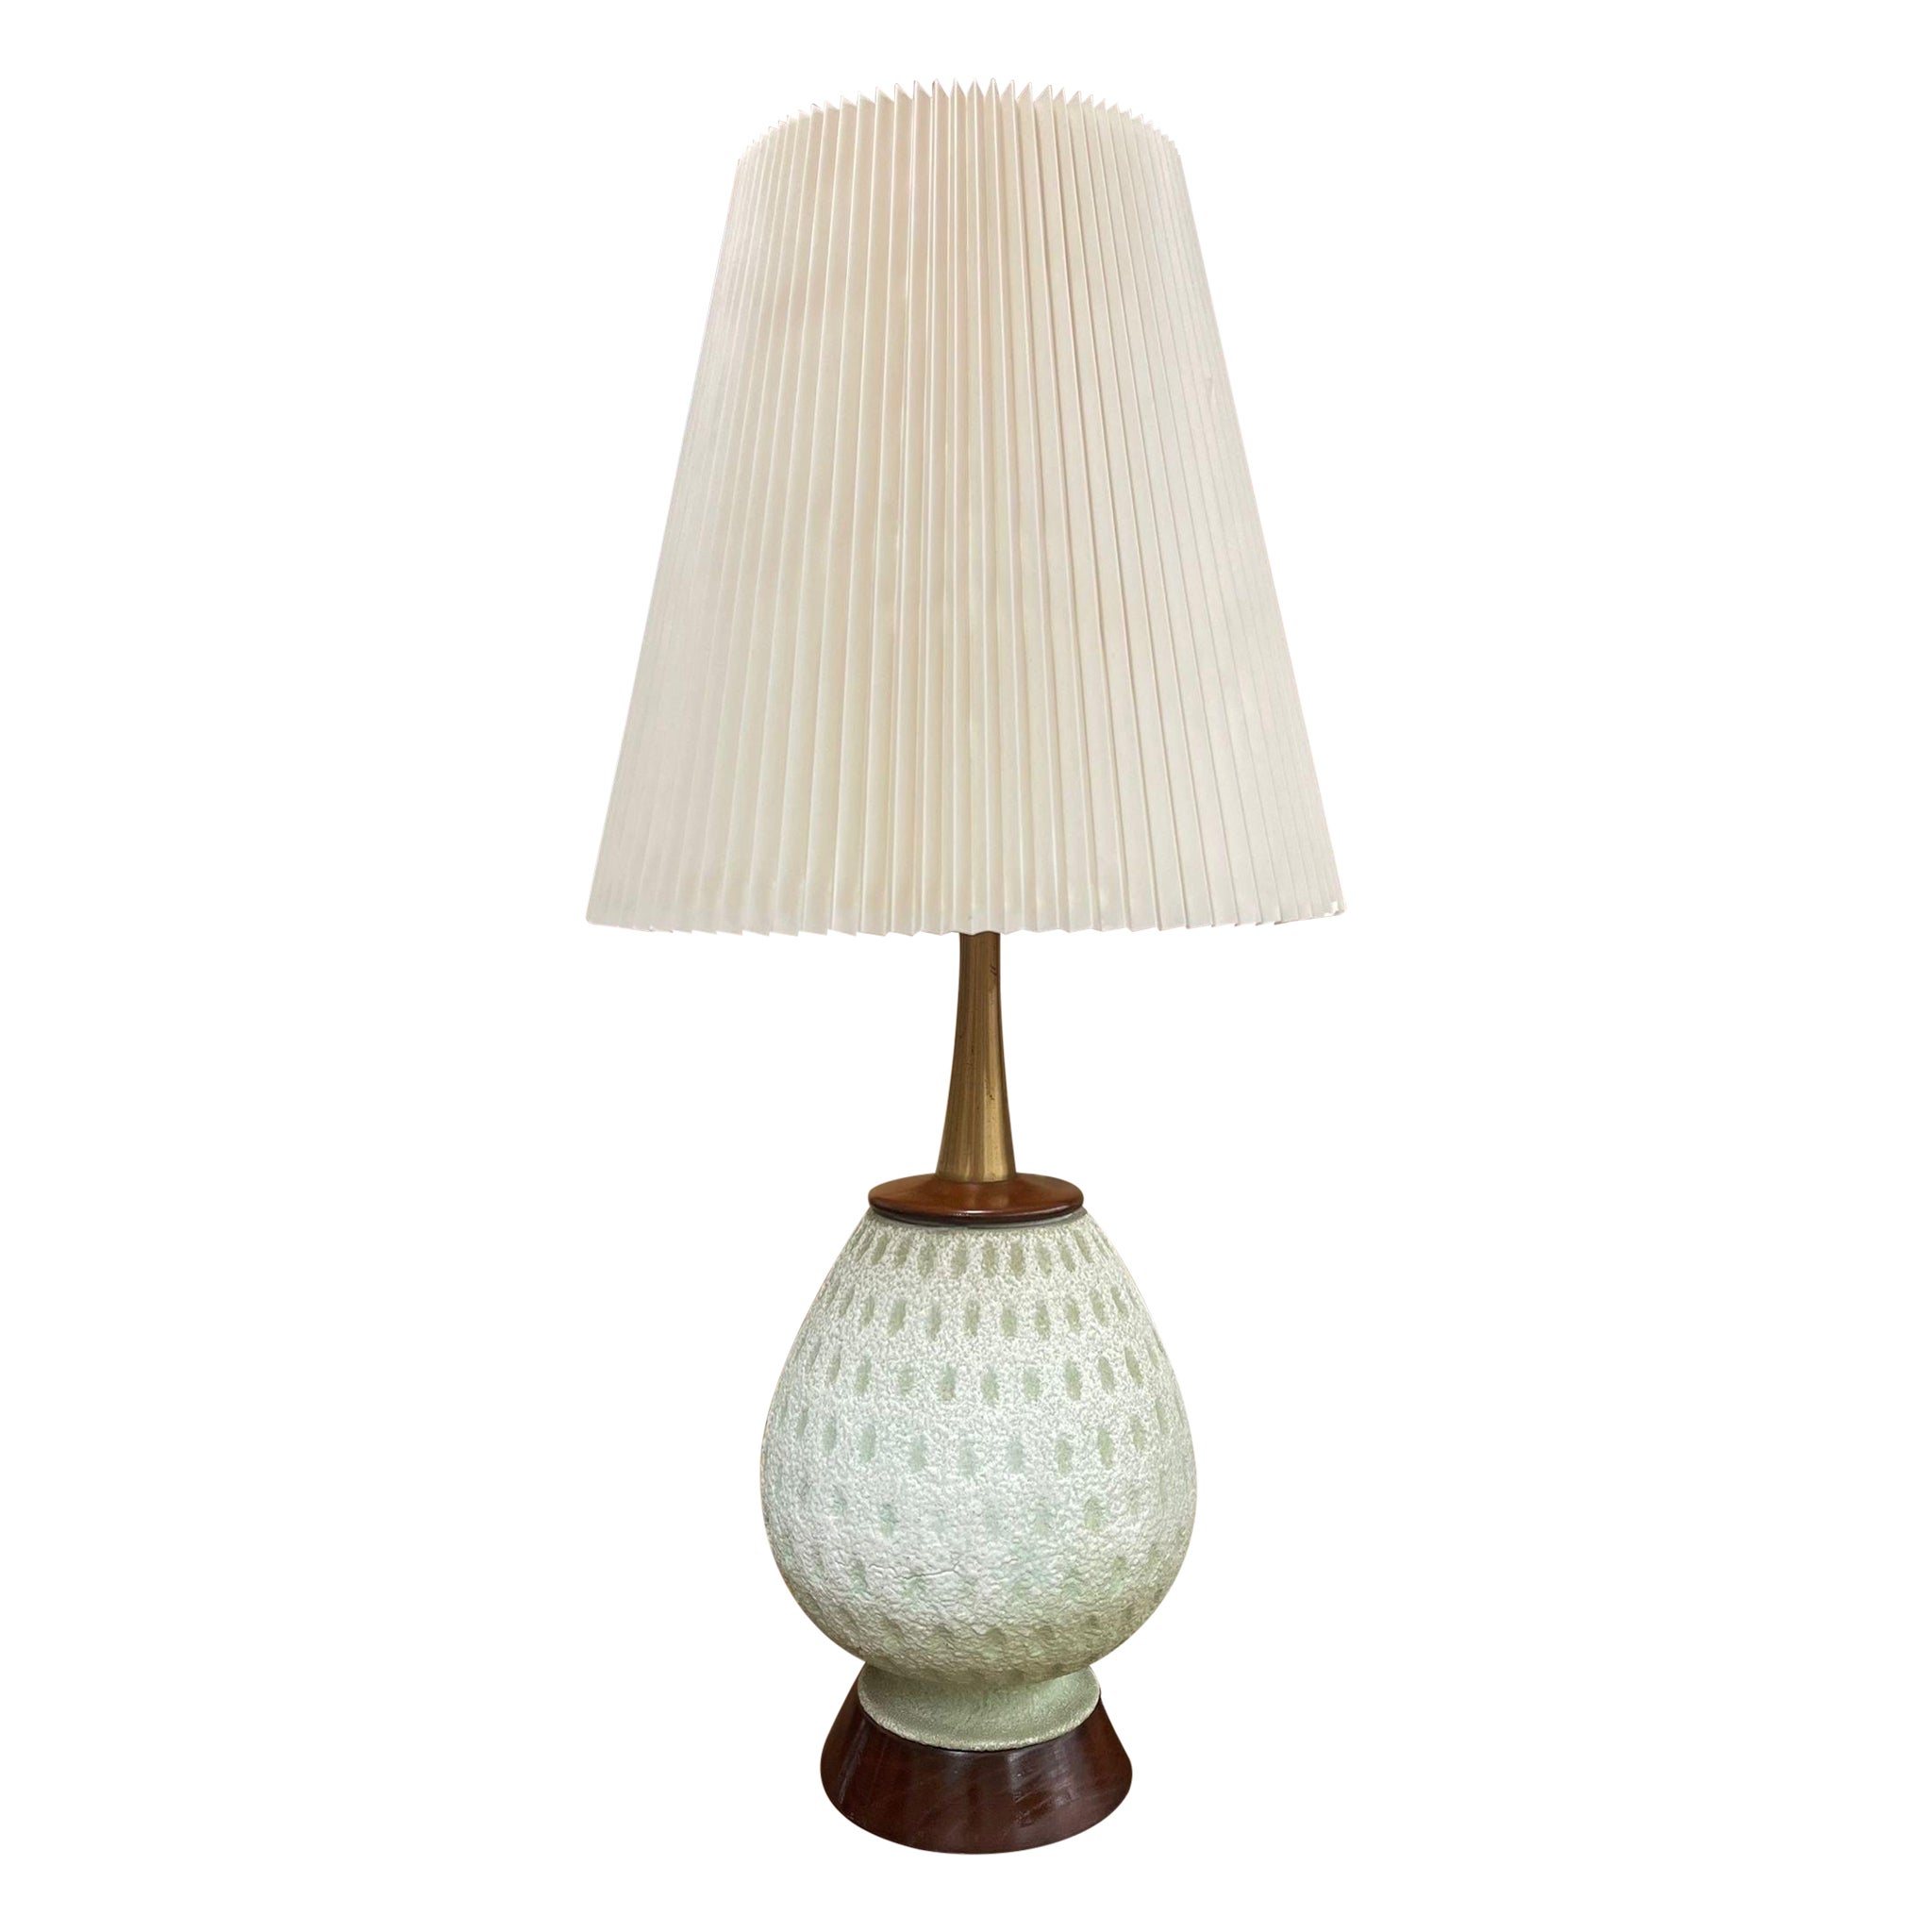 Vintage Table Lamp With Ceramic Base and Walnut Toned Wood Accents. For Sale